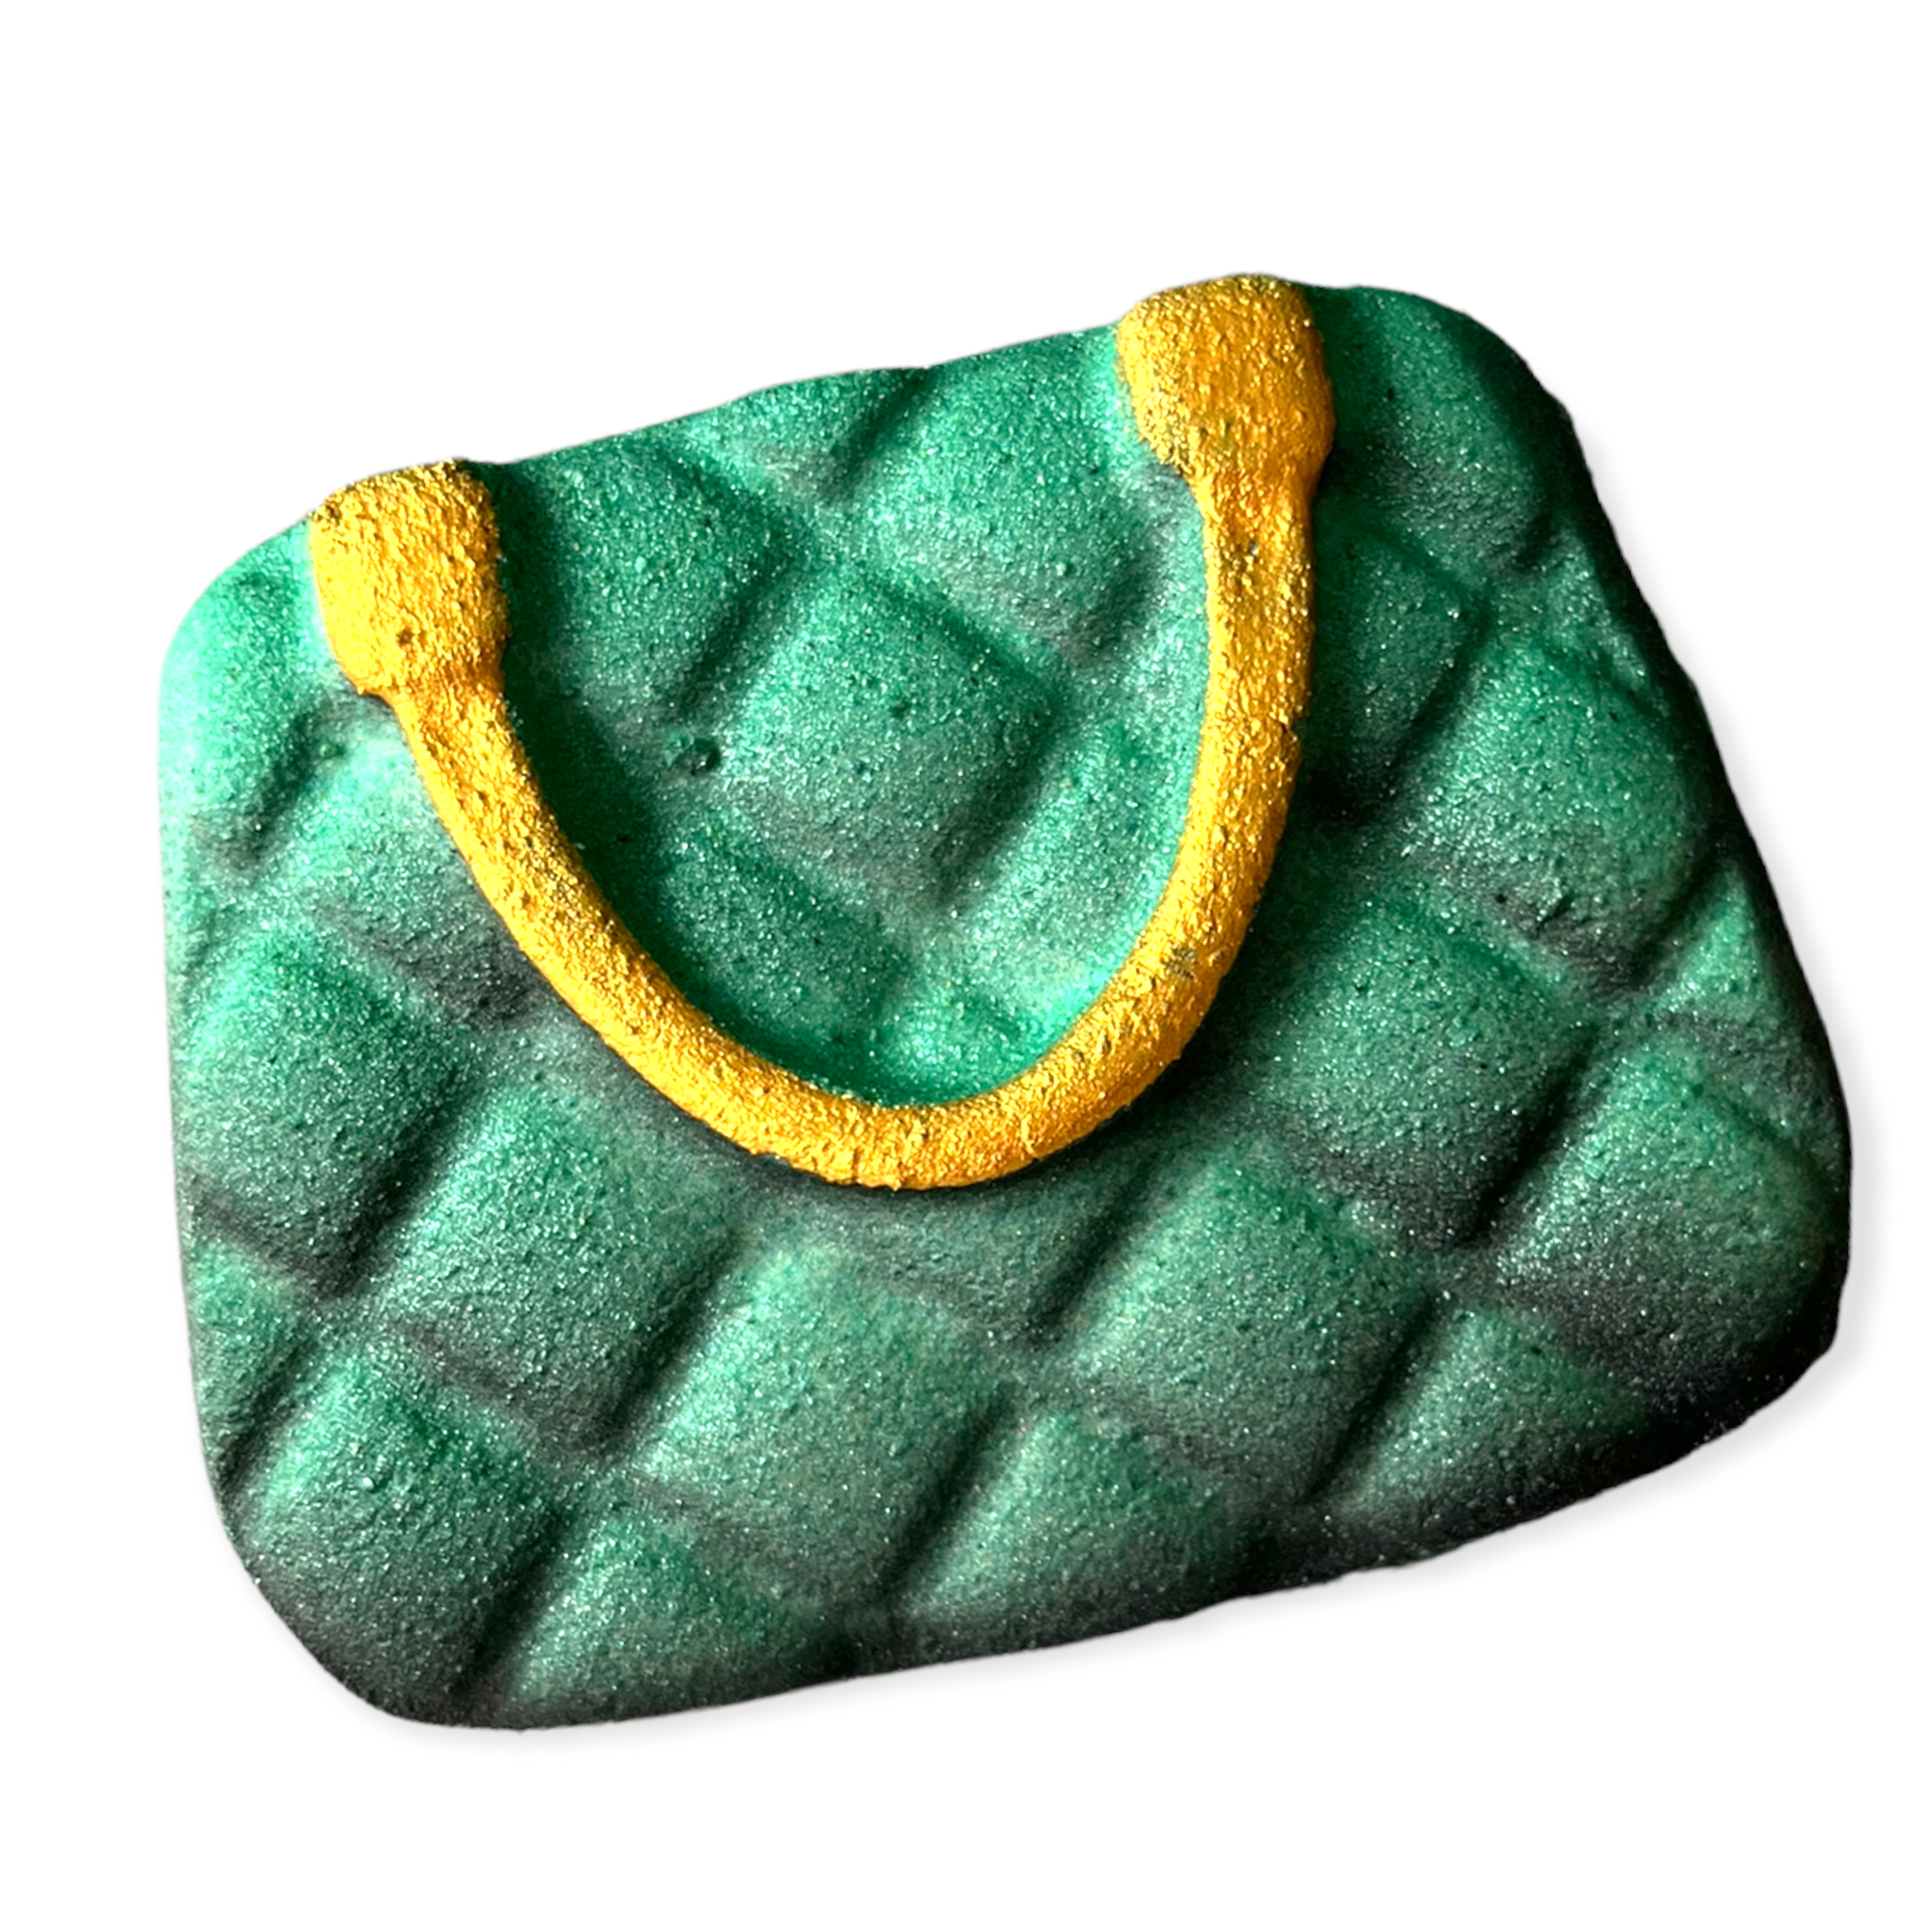 A front view of a Decadent Designer Bath bomb, shaped as a hand bag in the colour of blue and yellow.